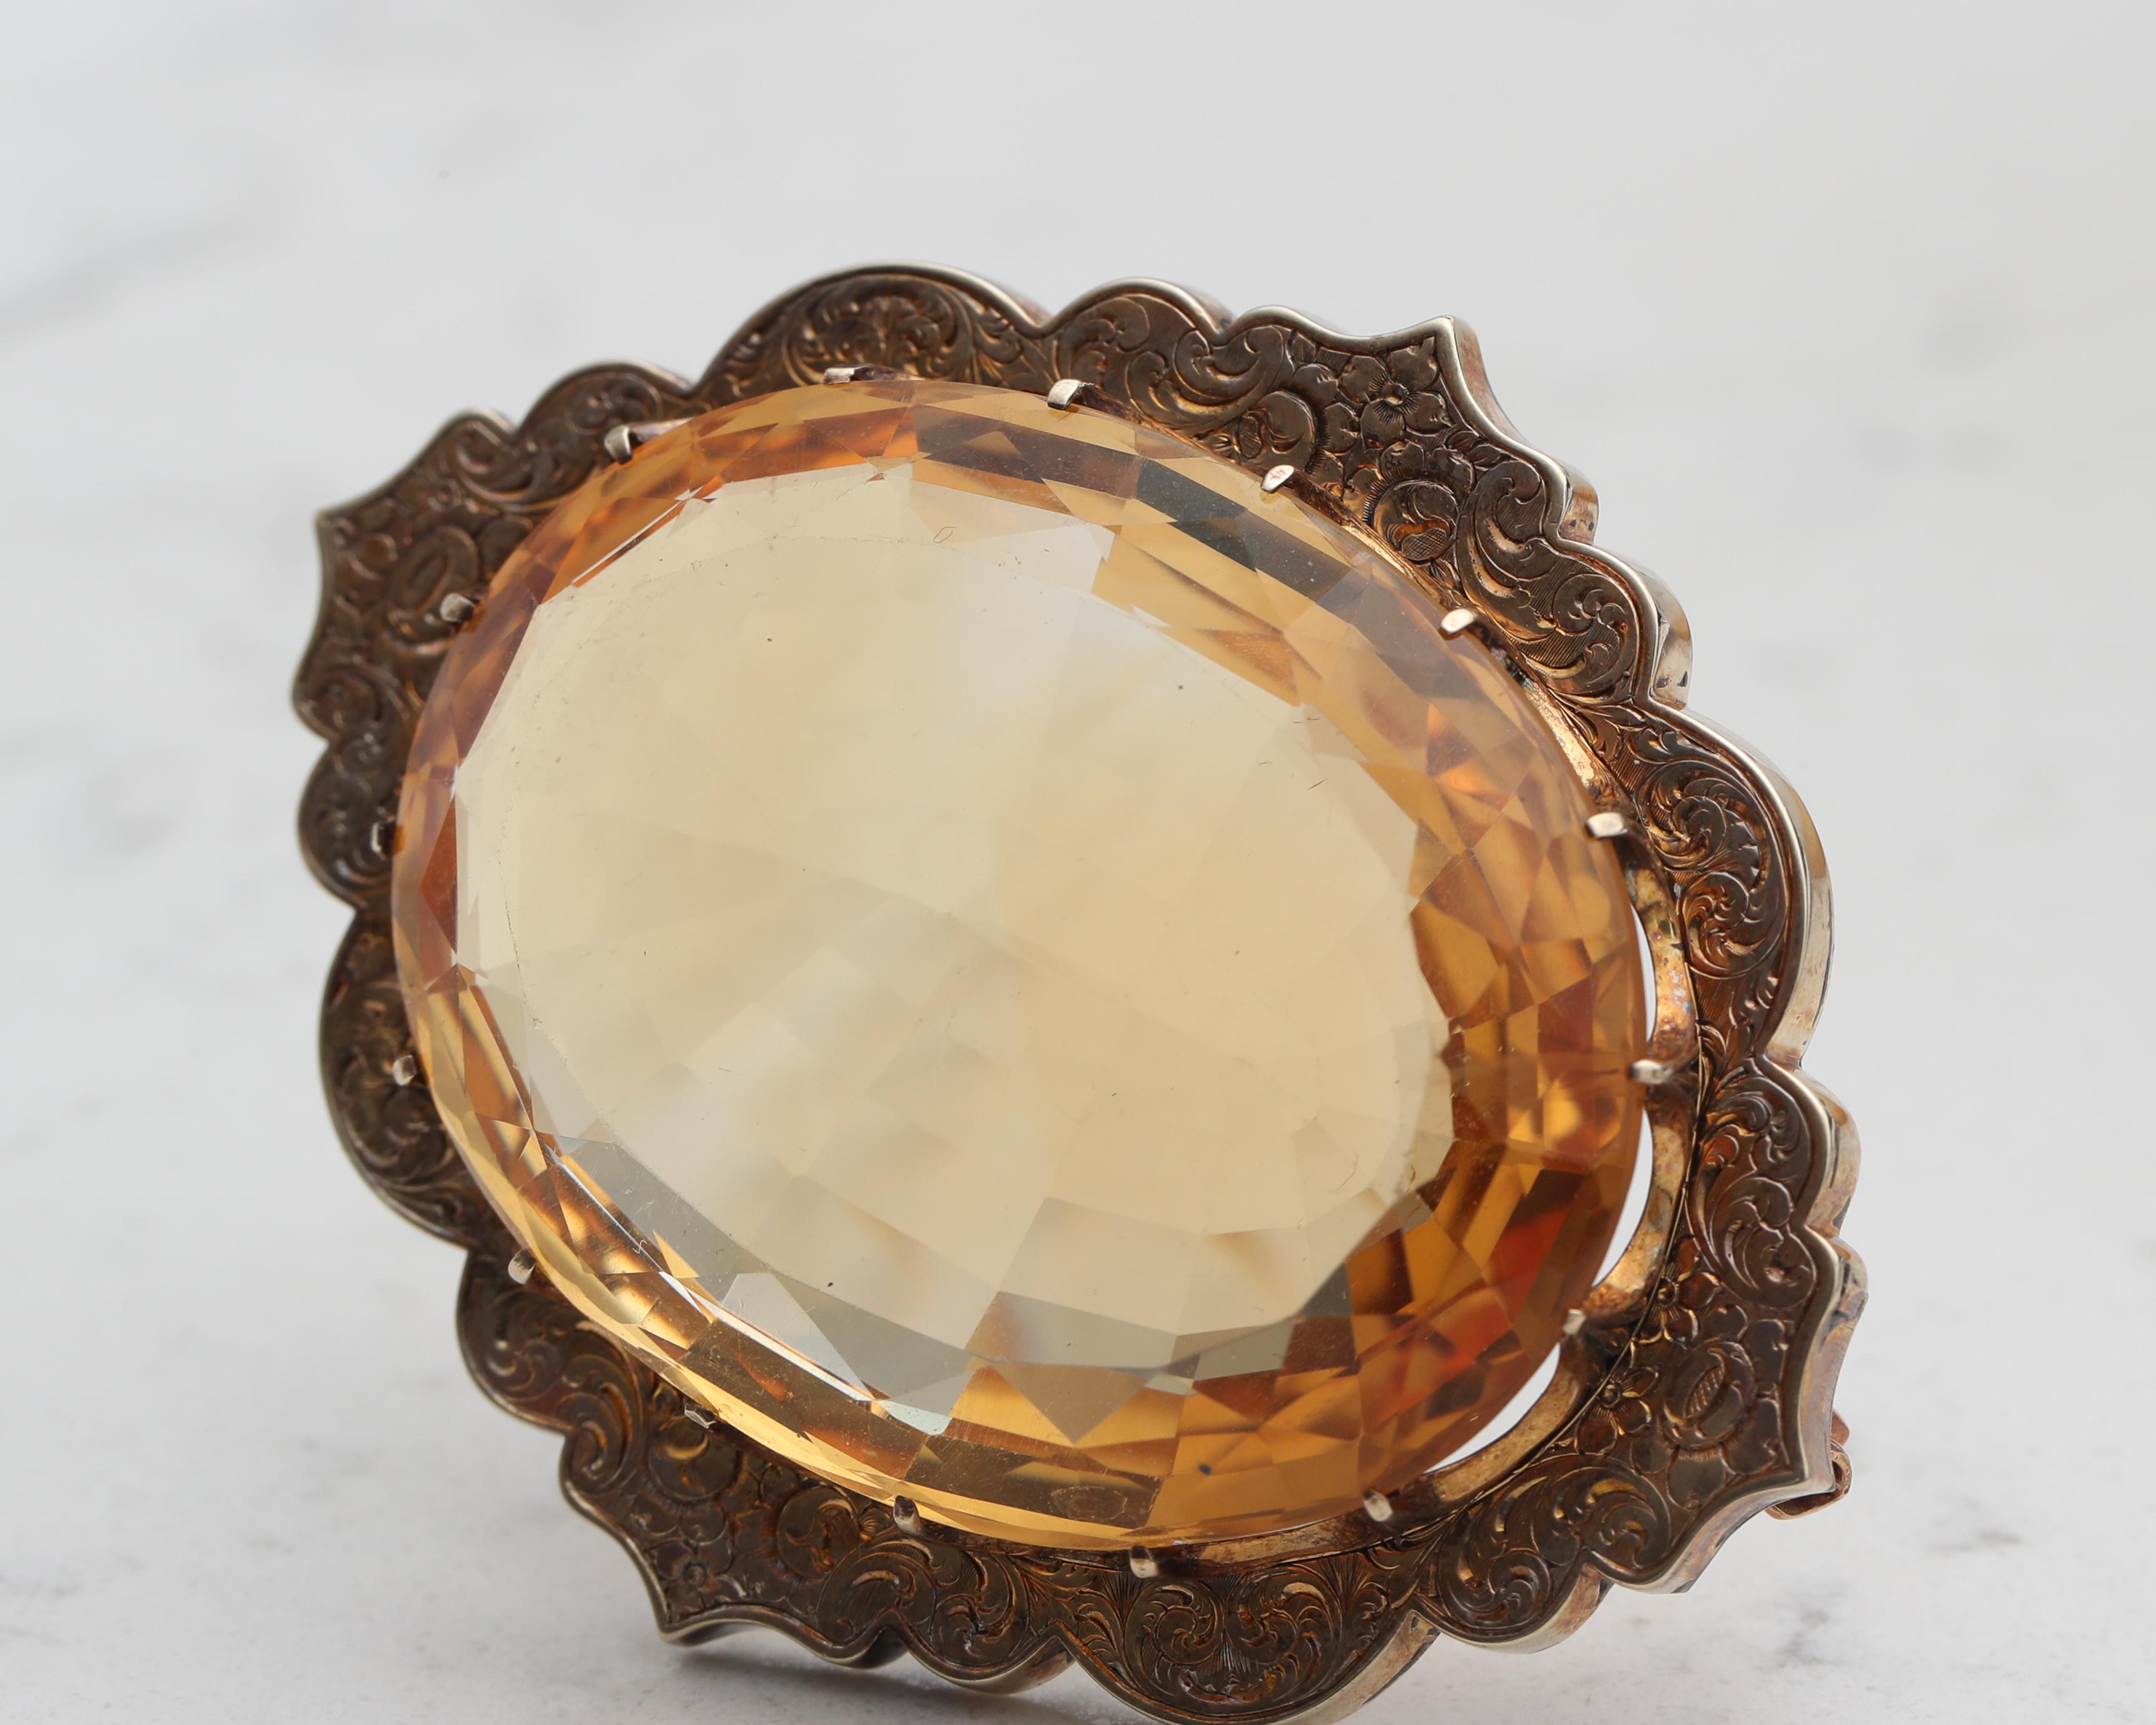 Ornate Citrine Brooch from the 1950s. The citrine is approximately 100 carats, in great condition with minor scratches. Beautifully crafted brooch with intricate details in 14 karat yellow gold. It's a bold statement piece with a lot of vintage